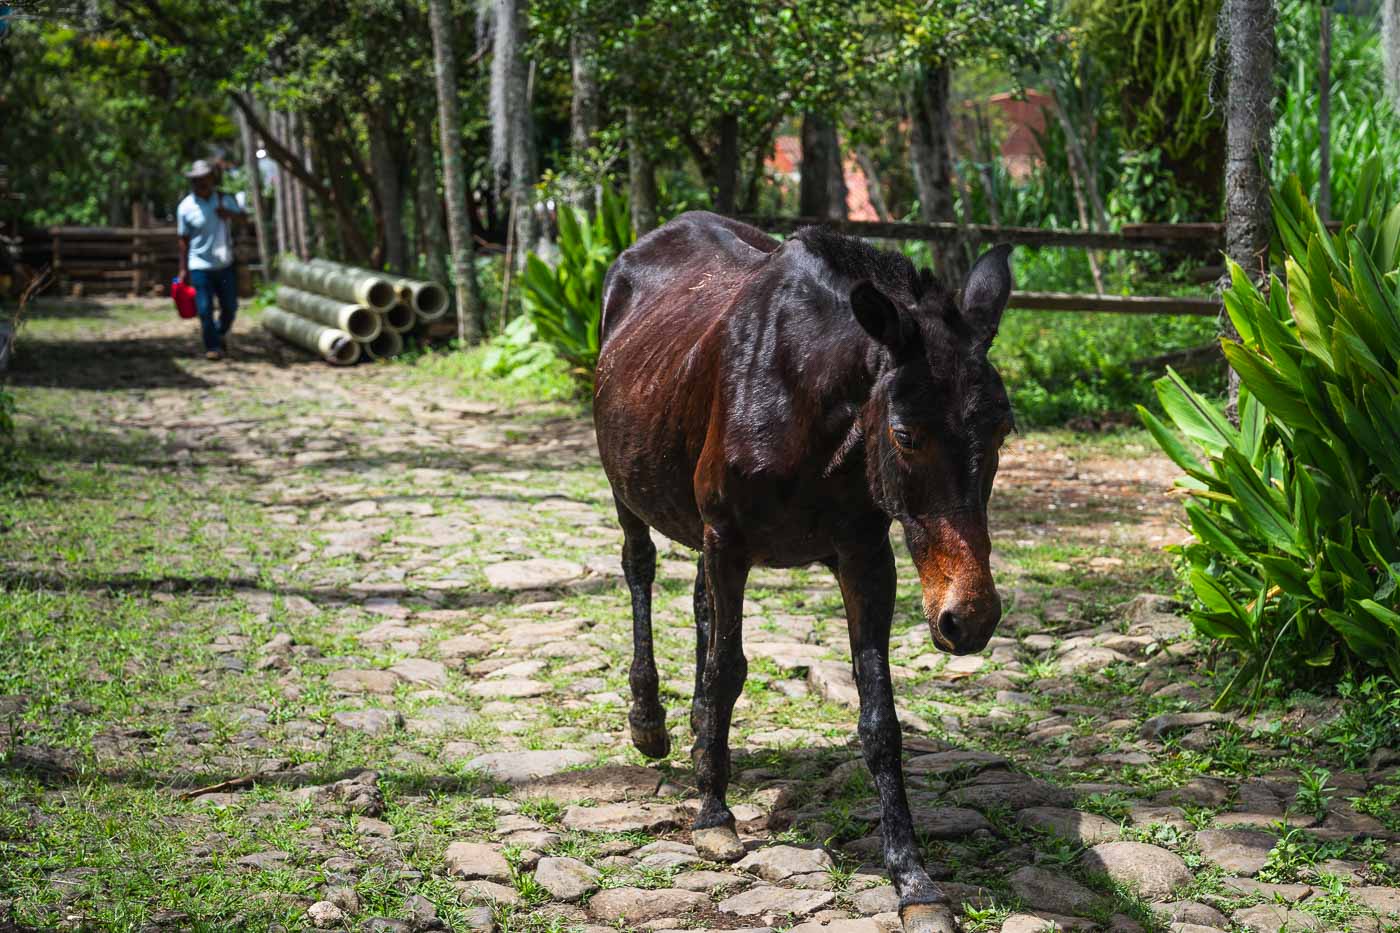 A horse walking along a cobblestone path surrounded by green bushes and trees in Jardin.